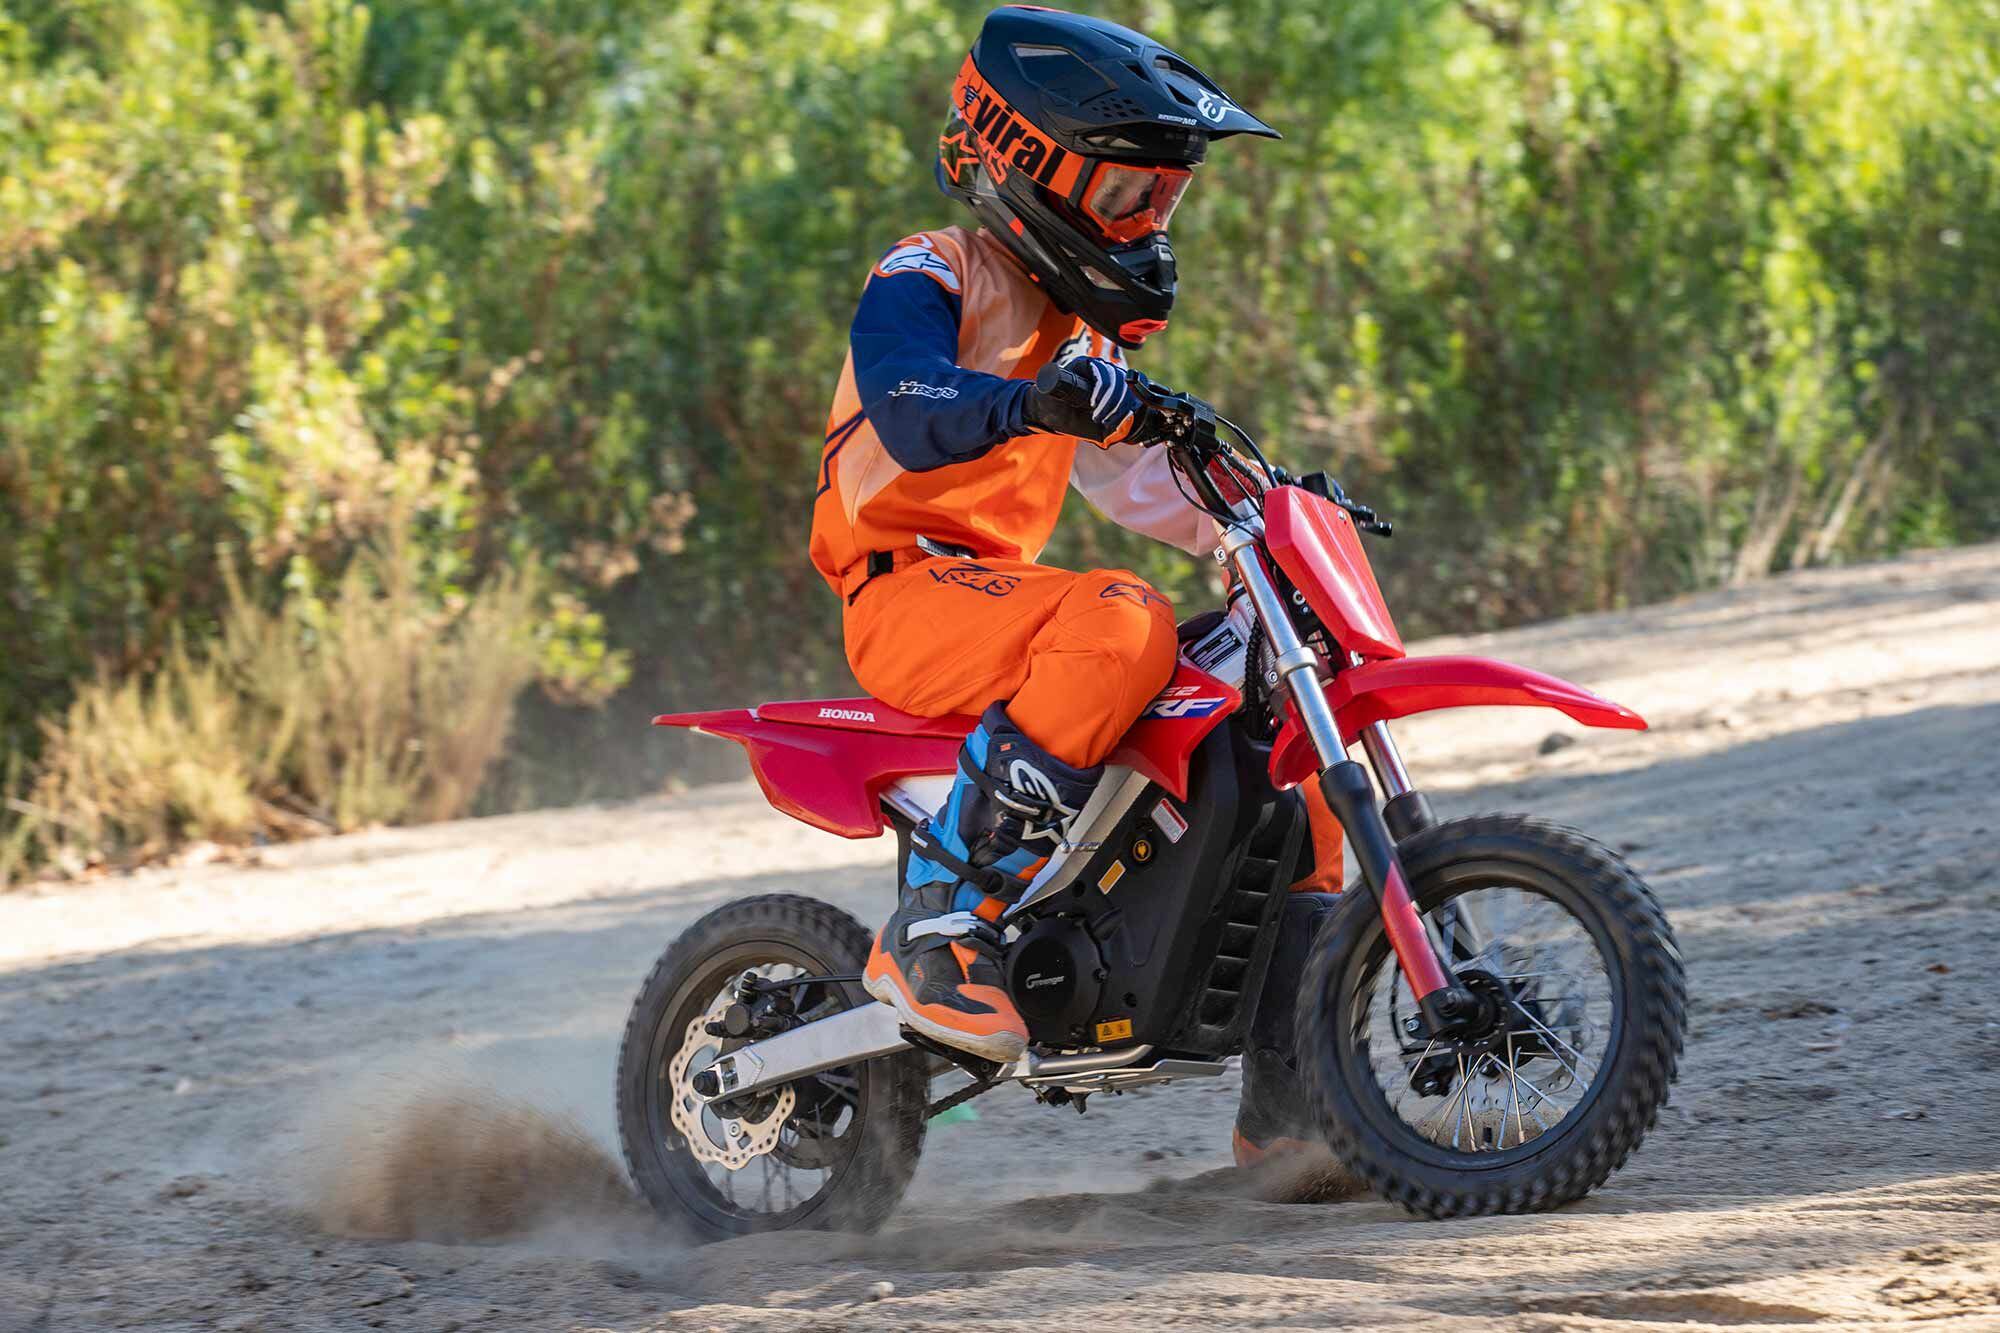 The CRF-E2’s 12-inch rims help slot it in between the gas-powered CRF50F (10-inch wheels) and the CRF110F (14-inch front and 12-inch rear).